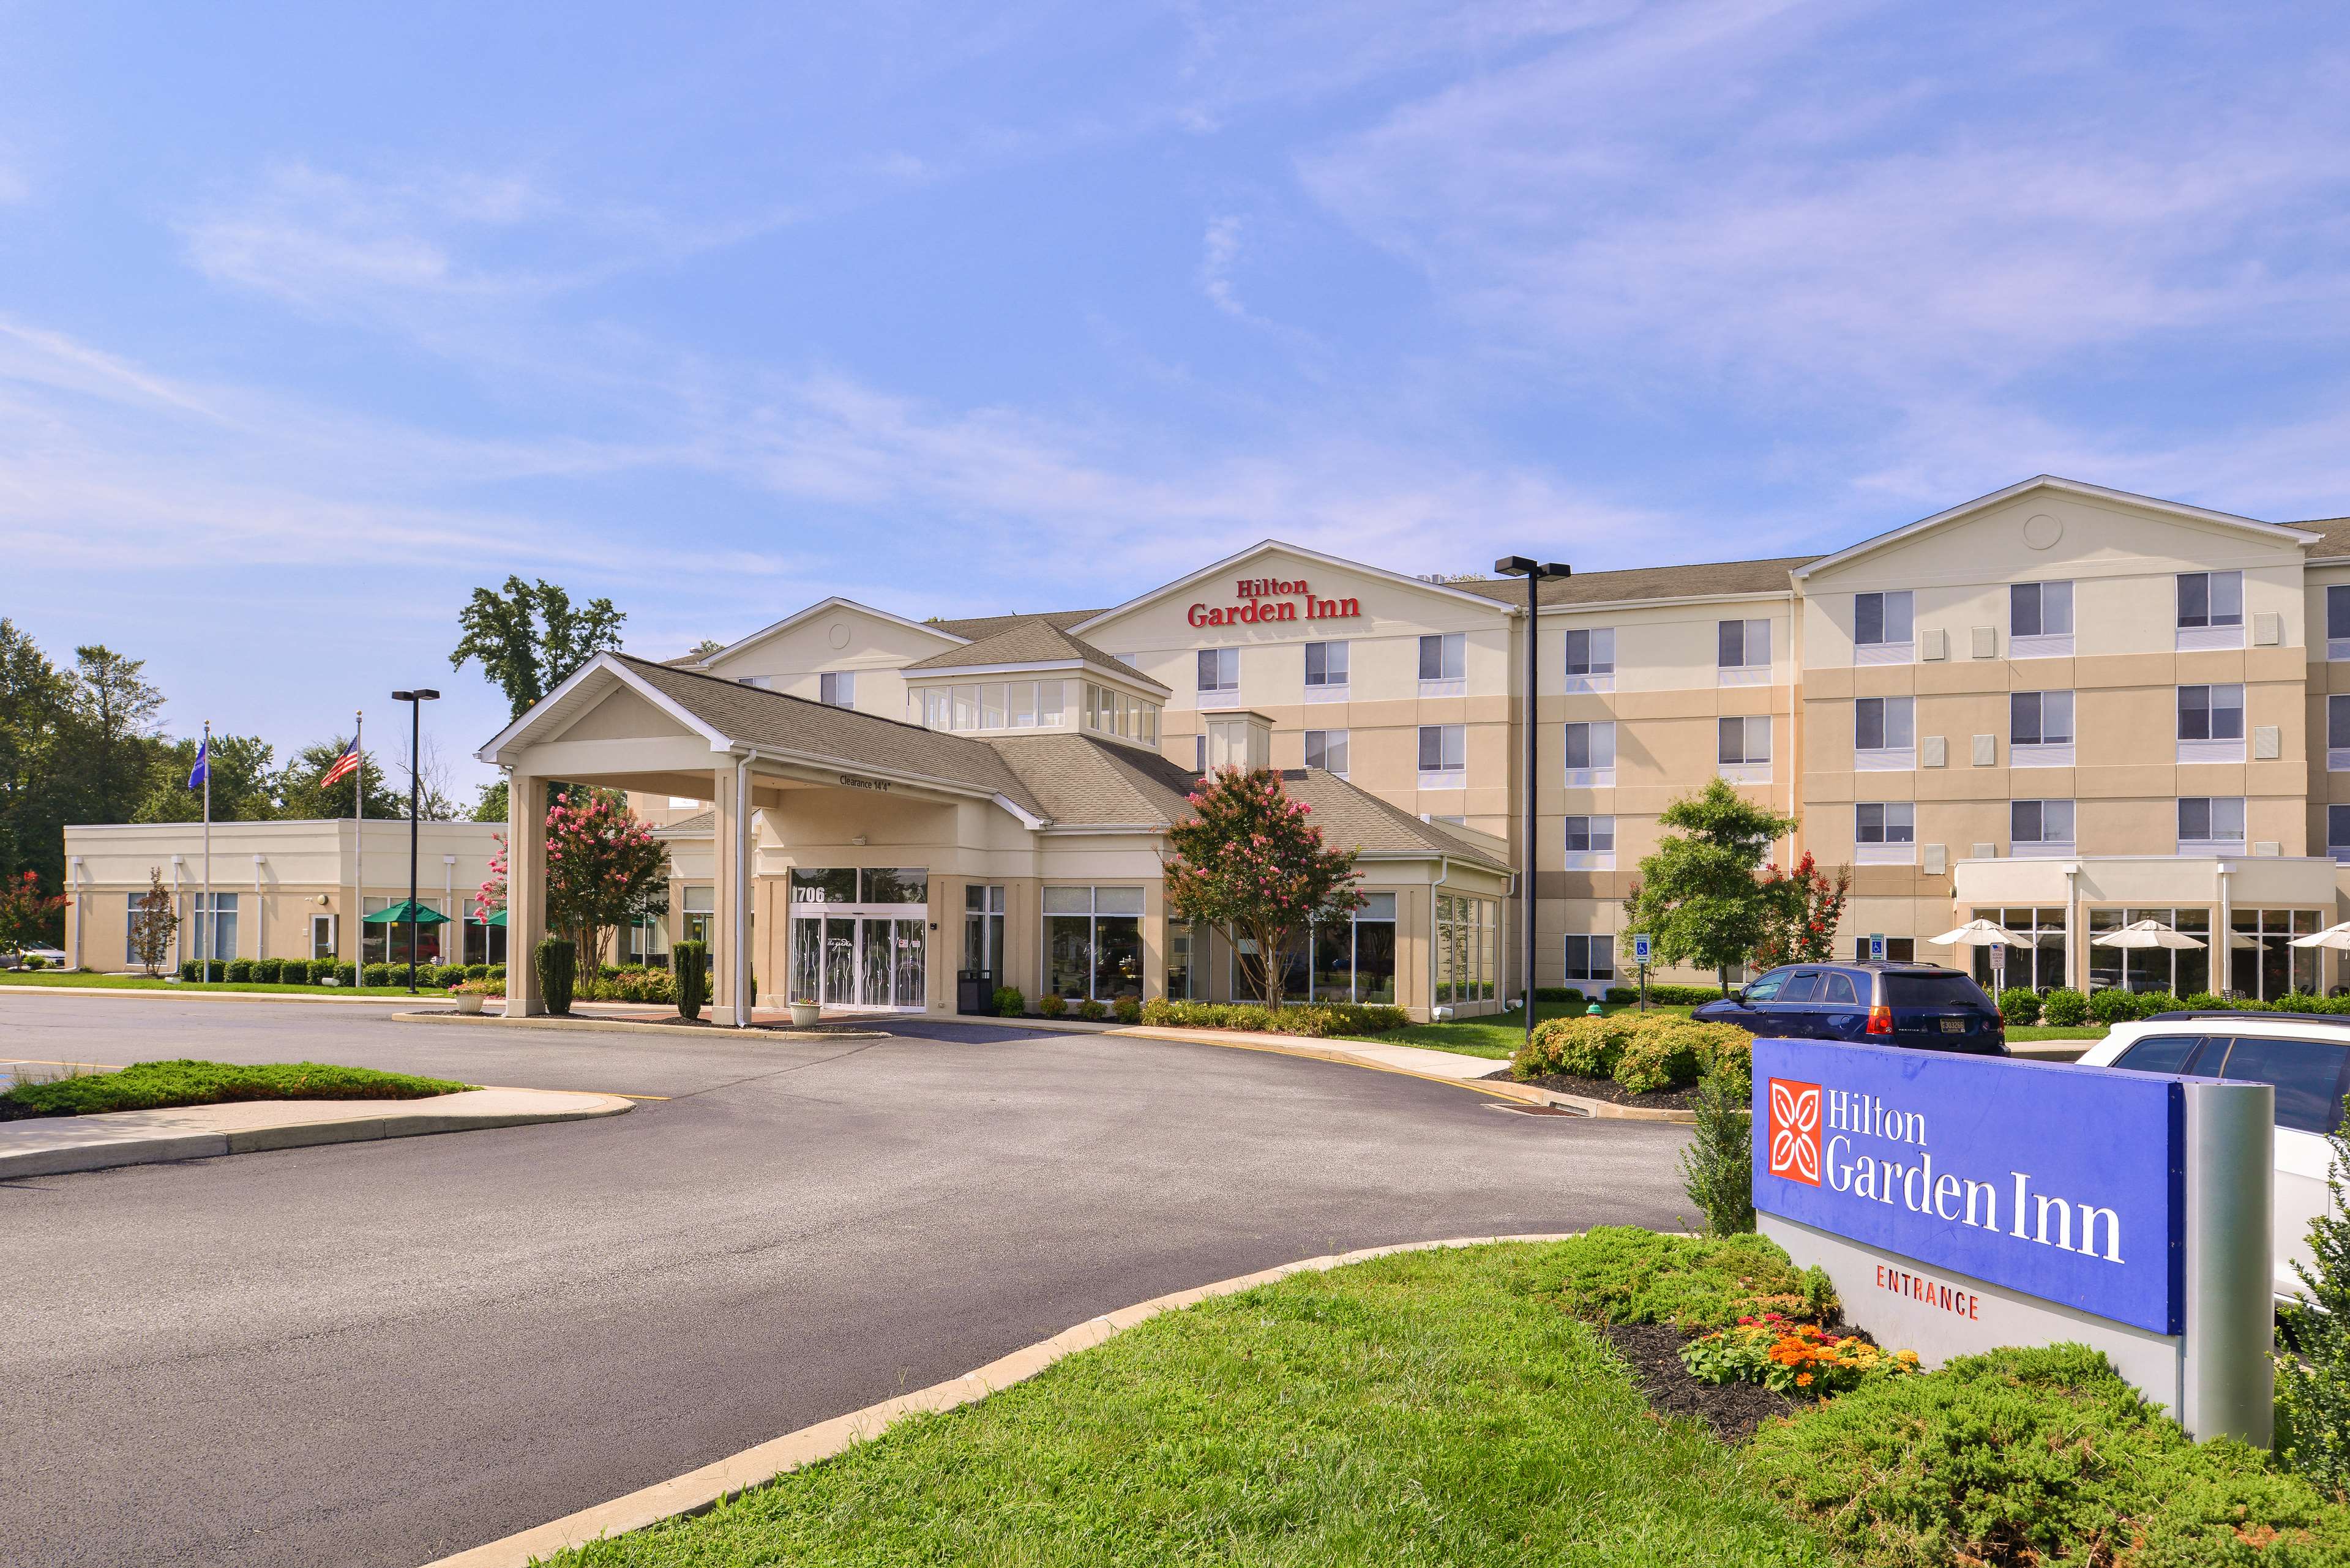 Get directions, reviews and information for Hilton Garden Inn Dover in Dove...